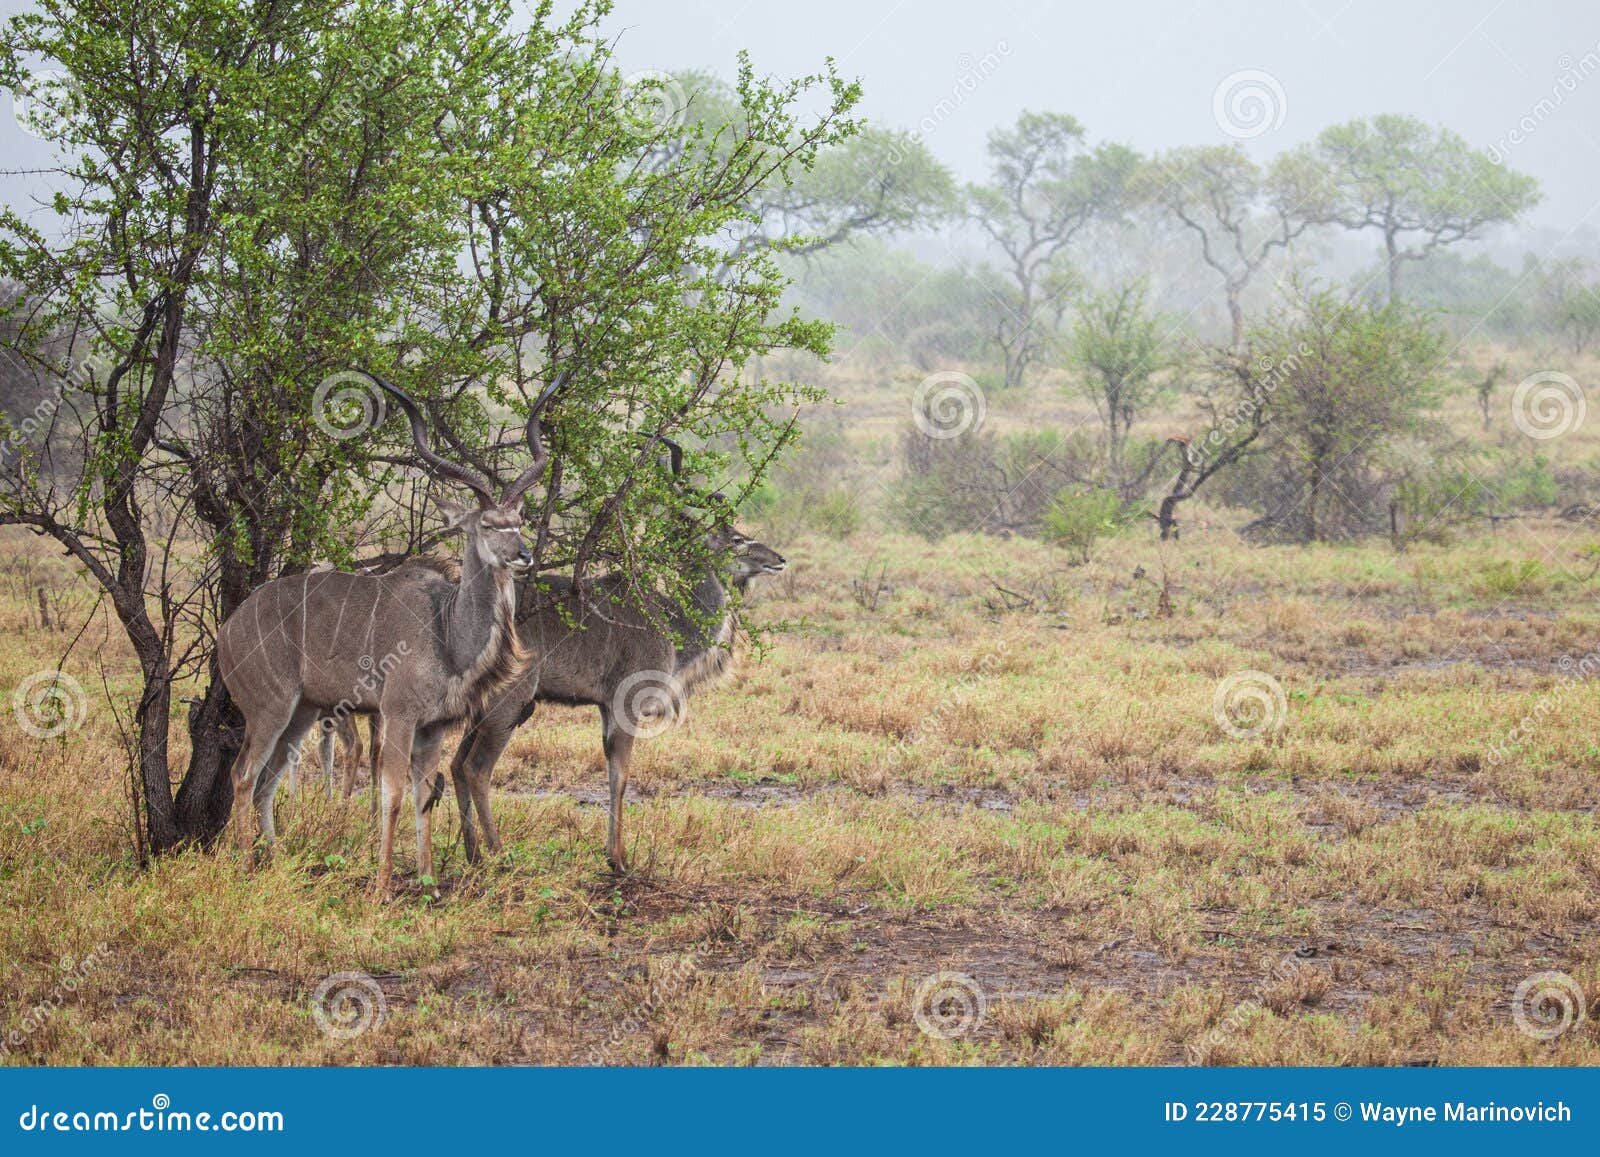 greater kudu standing in a thundershower in the kruger park